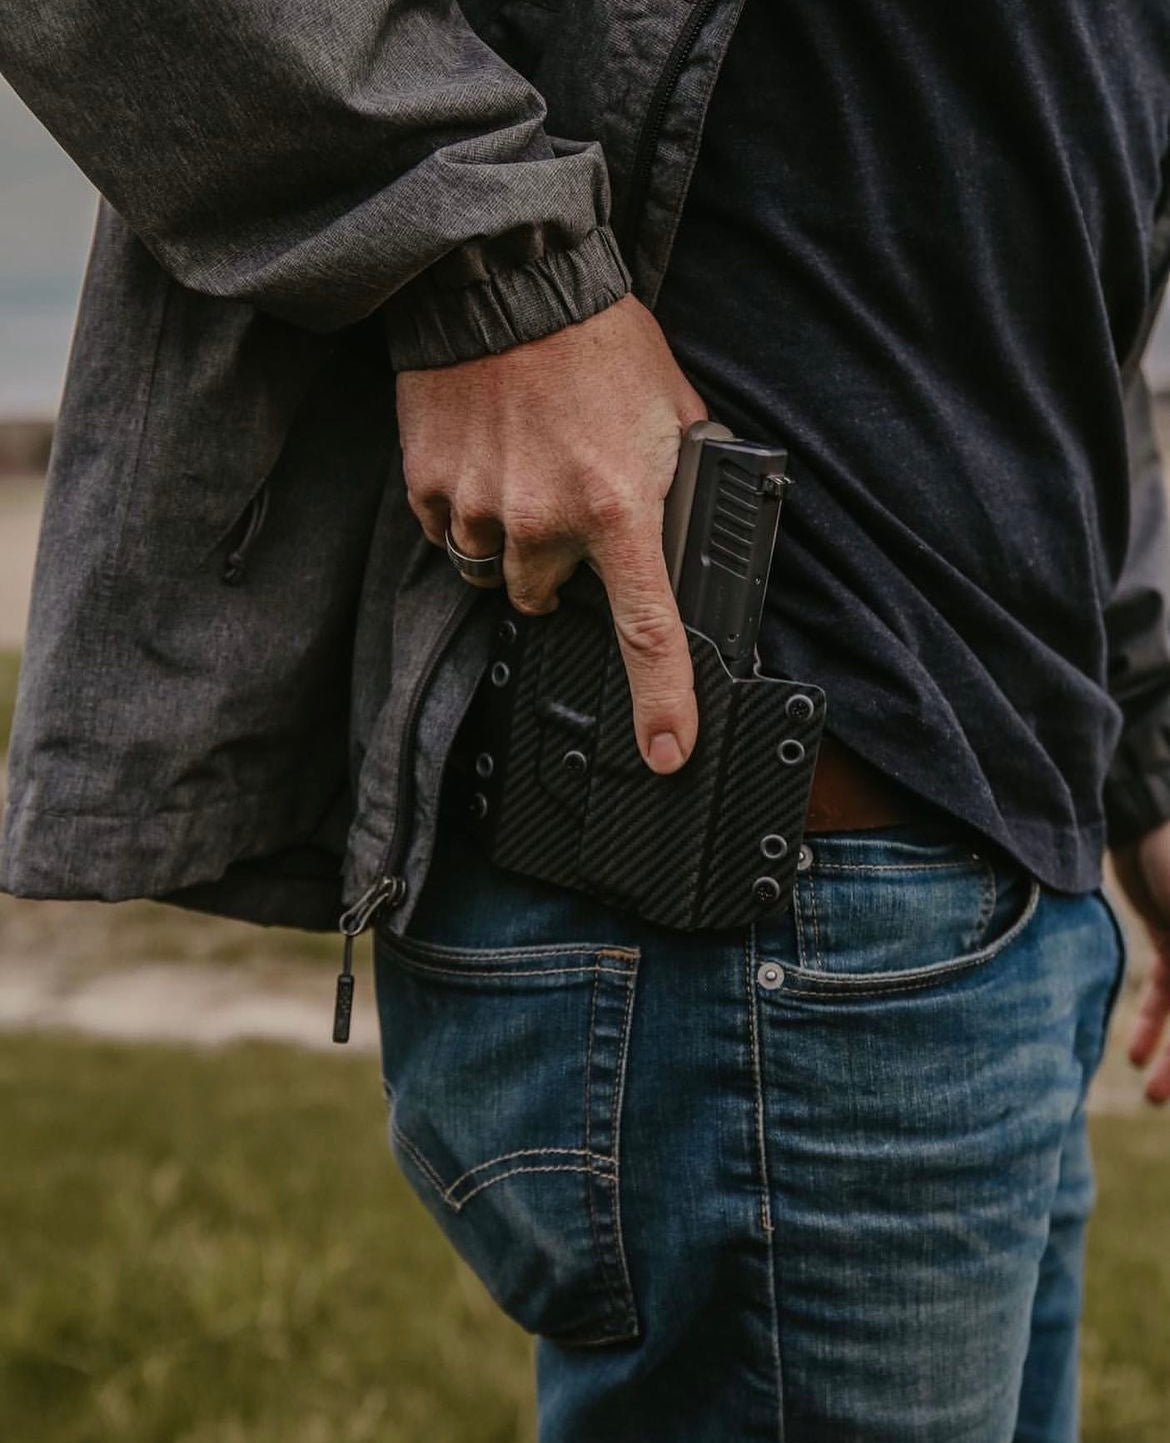 Appendix Carry: IWB Concealed Carry in the Front of the Waistband